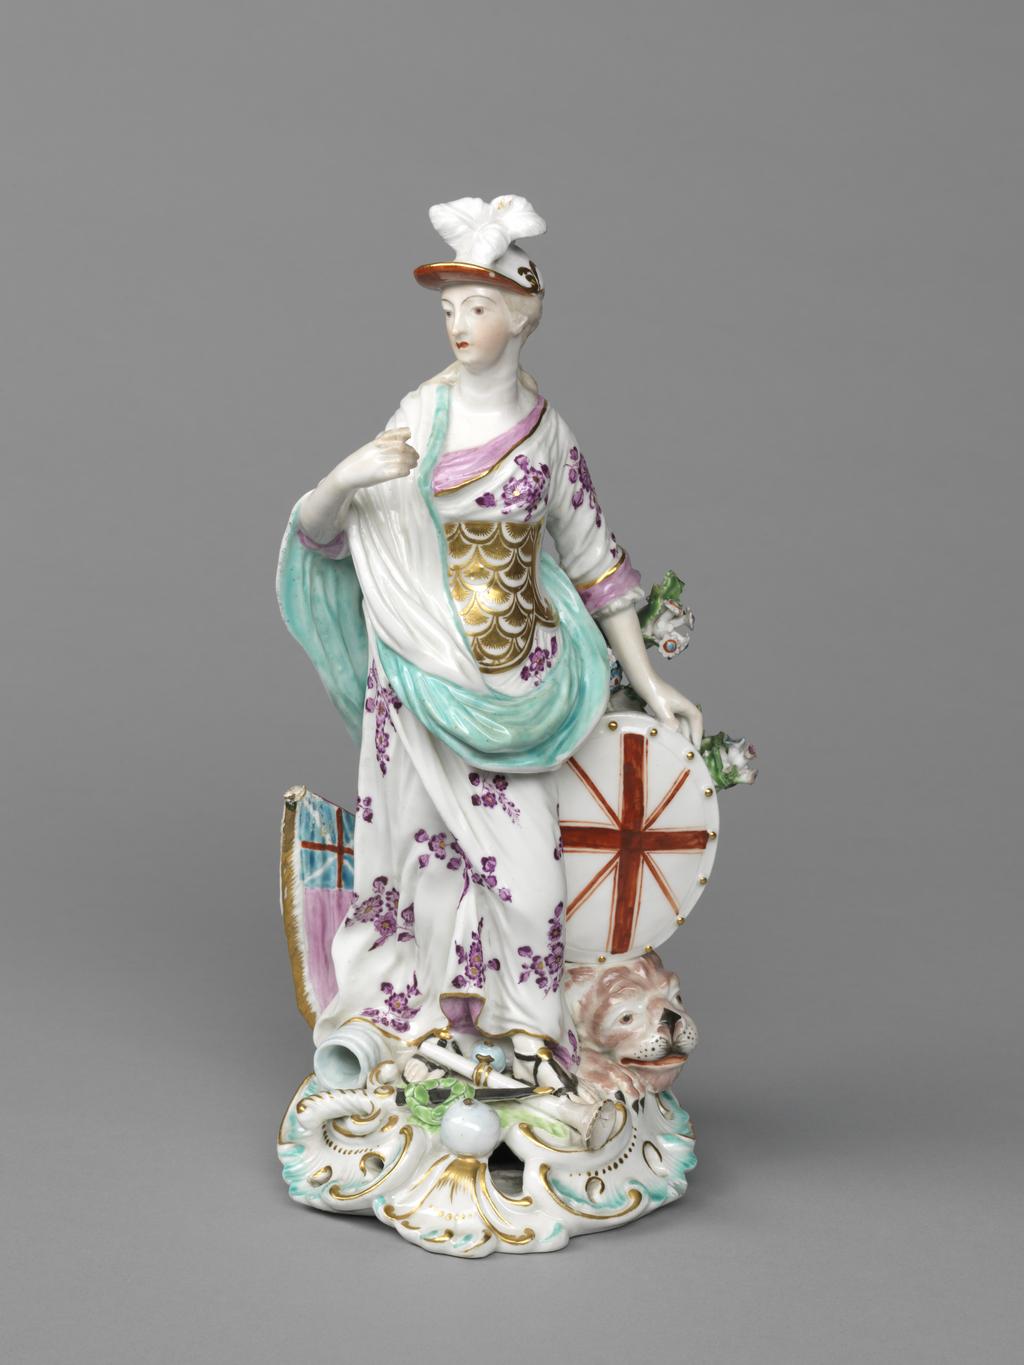 An image of Figure. Britannia. Derby Porcelain Factory, Derbyshire. William Duesbury & Co., proprietor. The base is approximately circular with a rococo scrolled and pierced front edge, and rises up at the back into a broad tree trunk with two branches bearing flowers and foliage on the figure’s left. Britannia stands with her left foot slightly advanced, her head turned a little to her right as she looks towards her raised right hand. Her left arm is a little behind her, the hand supporting an oval shield charged with red crosses of St George and St Andrew, which rests on the head of a lion. She has long, pale brown hair, tied back, and a cap with three white feathers at the front and a red underside to the peak. She wears a white dress with a puce floral pattern, pink cuffs, and pink drape round the neckline, a gilt scale cuirass, a white and turquoise shawl draped over her right shoulder and arm, and black sandals with a gold button on top. On the figure’s right a pink flag with a Union Jack in the top corner projects from the tree trunk. On the base there is a pale blue canon mouth, two pale blue canon balls of different sizes, a sword with a black scabbard with green wreath resting on it, and a white trumpet. The edge is picked out in turquoise and gold. Soft-paste porcelain, slip-cast, and painted overglaze in pale blue, turquoise, green, flesh pink, pink, puce, red, pale brown, and black enamels, and gilt. The unglazed underside has been ground flat, and has three patch marks, and a large circular central ventilation hole. Height, whole, 26 cm, width, whole, 12.8 cm, circa 1765. Rococo.